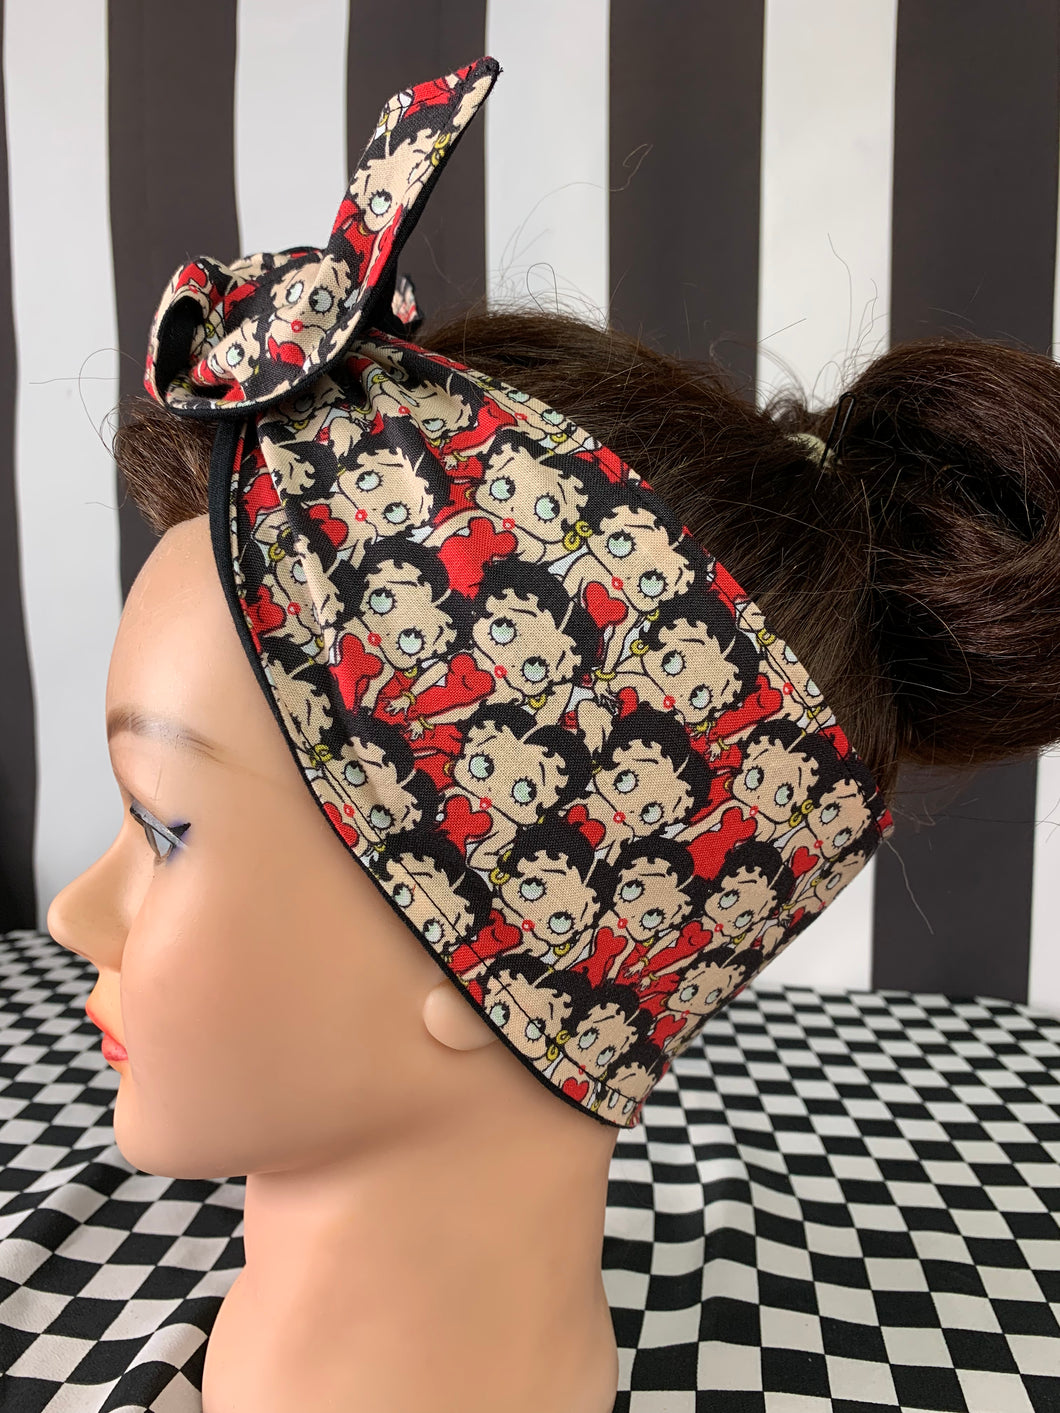 Boop themed wired headbands